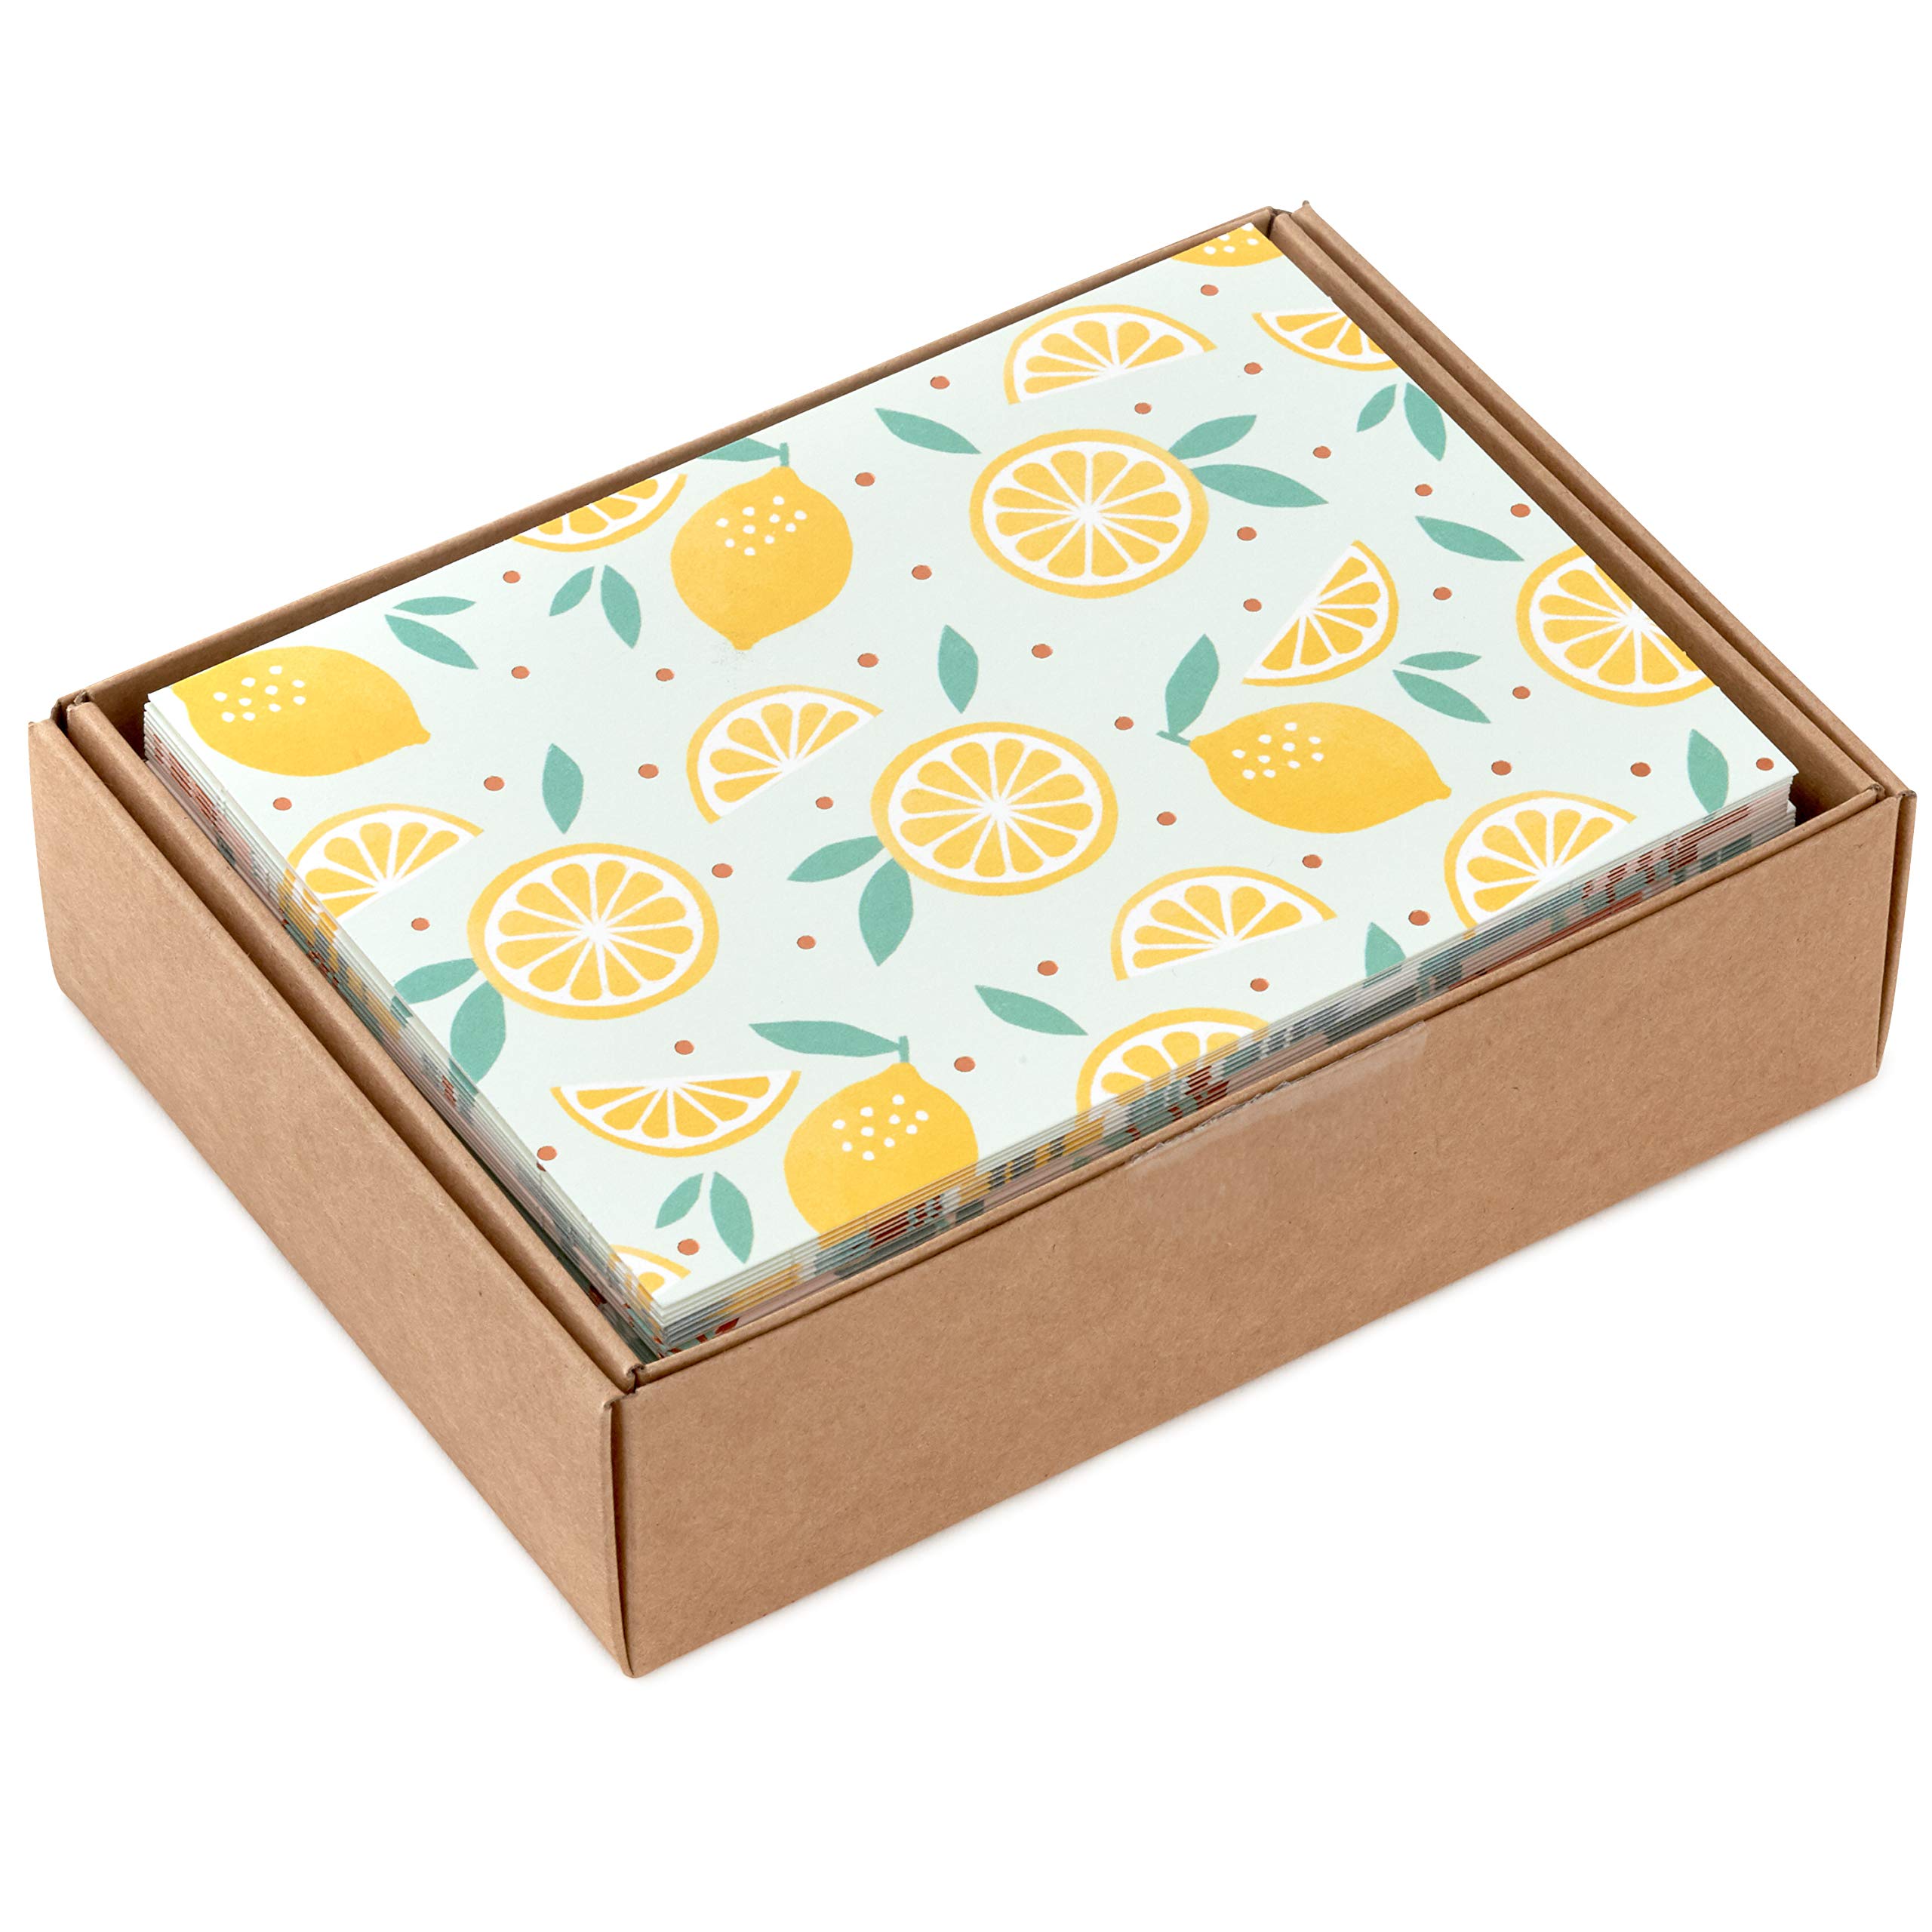 Hallmark Blank Cards Assortment, 24 Cards with Envelopes (Citrus, Greenery, Gingham, Strawberries) & Blank Cards Assortment, Nature Prints (48 Cards with Envelopes)